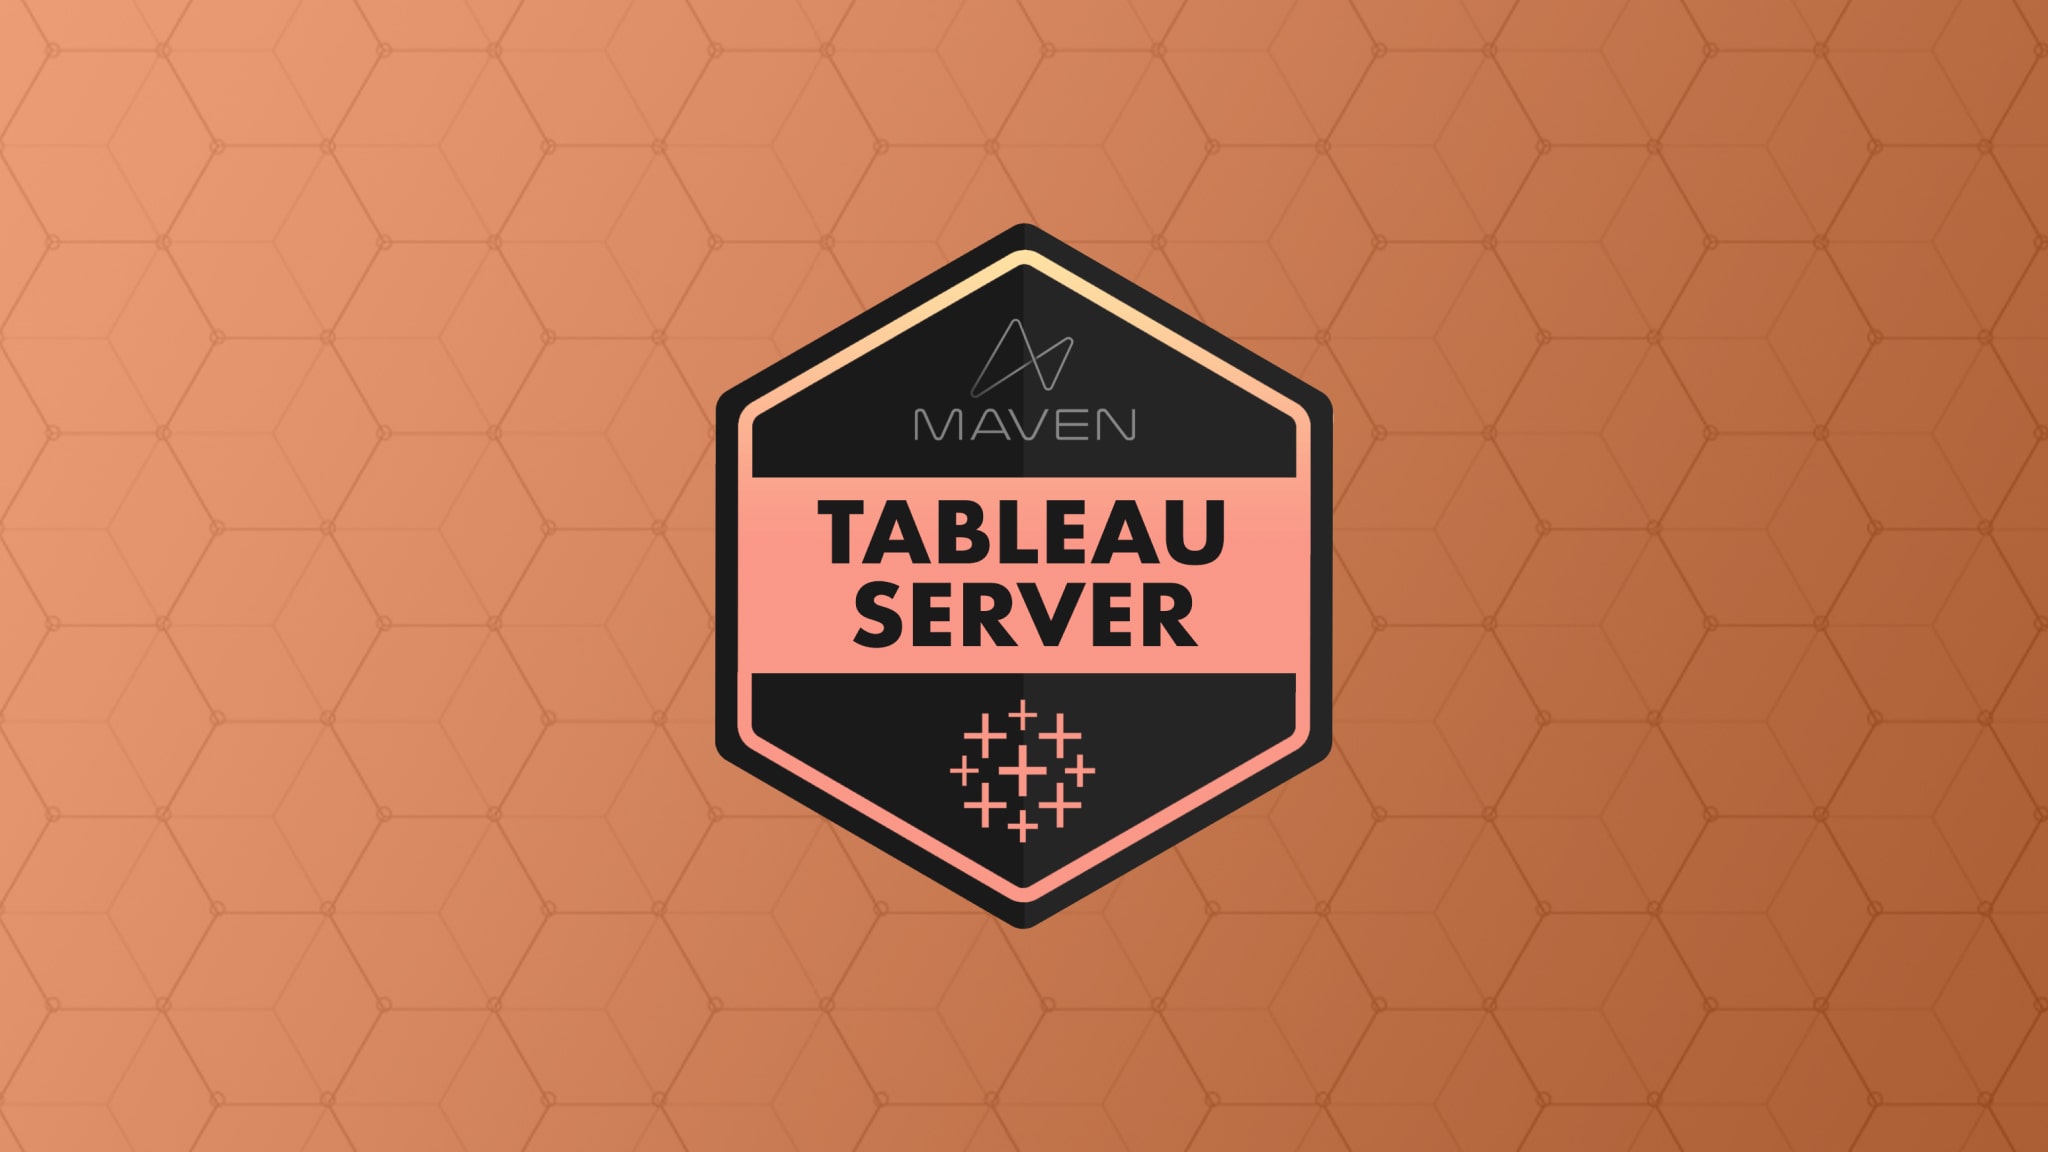 Tableau Server for Analysts